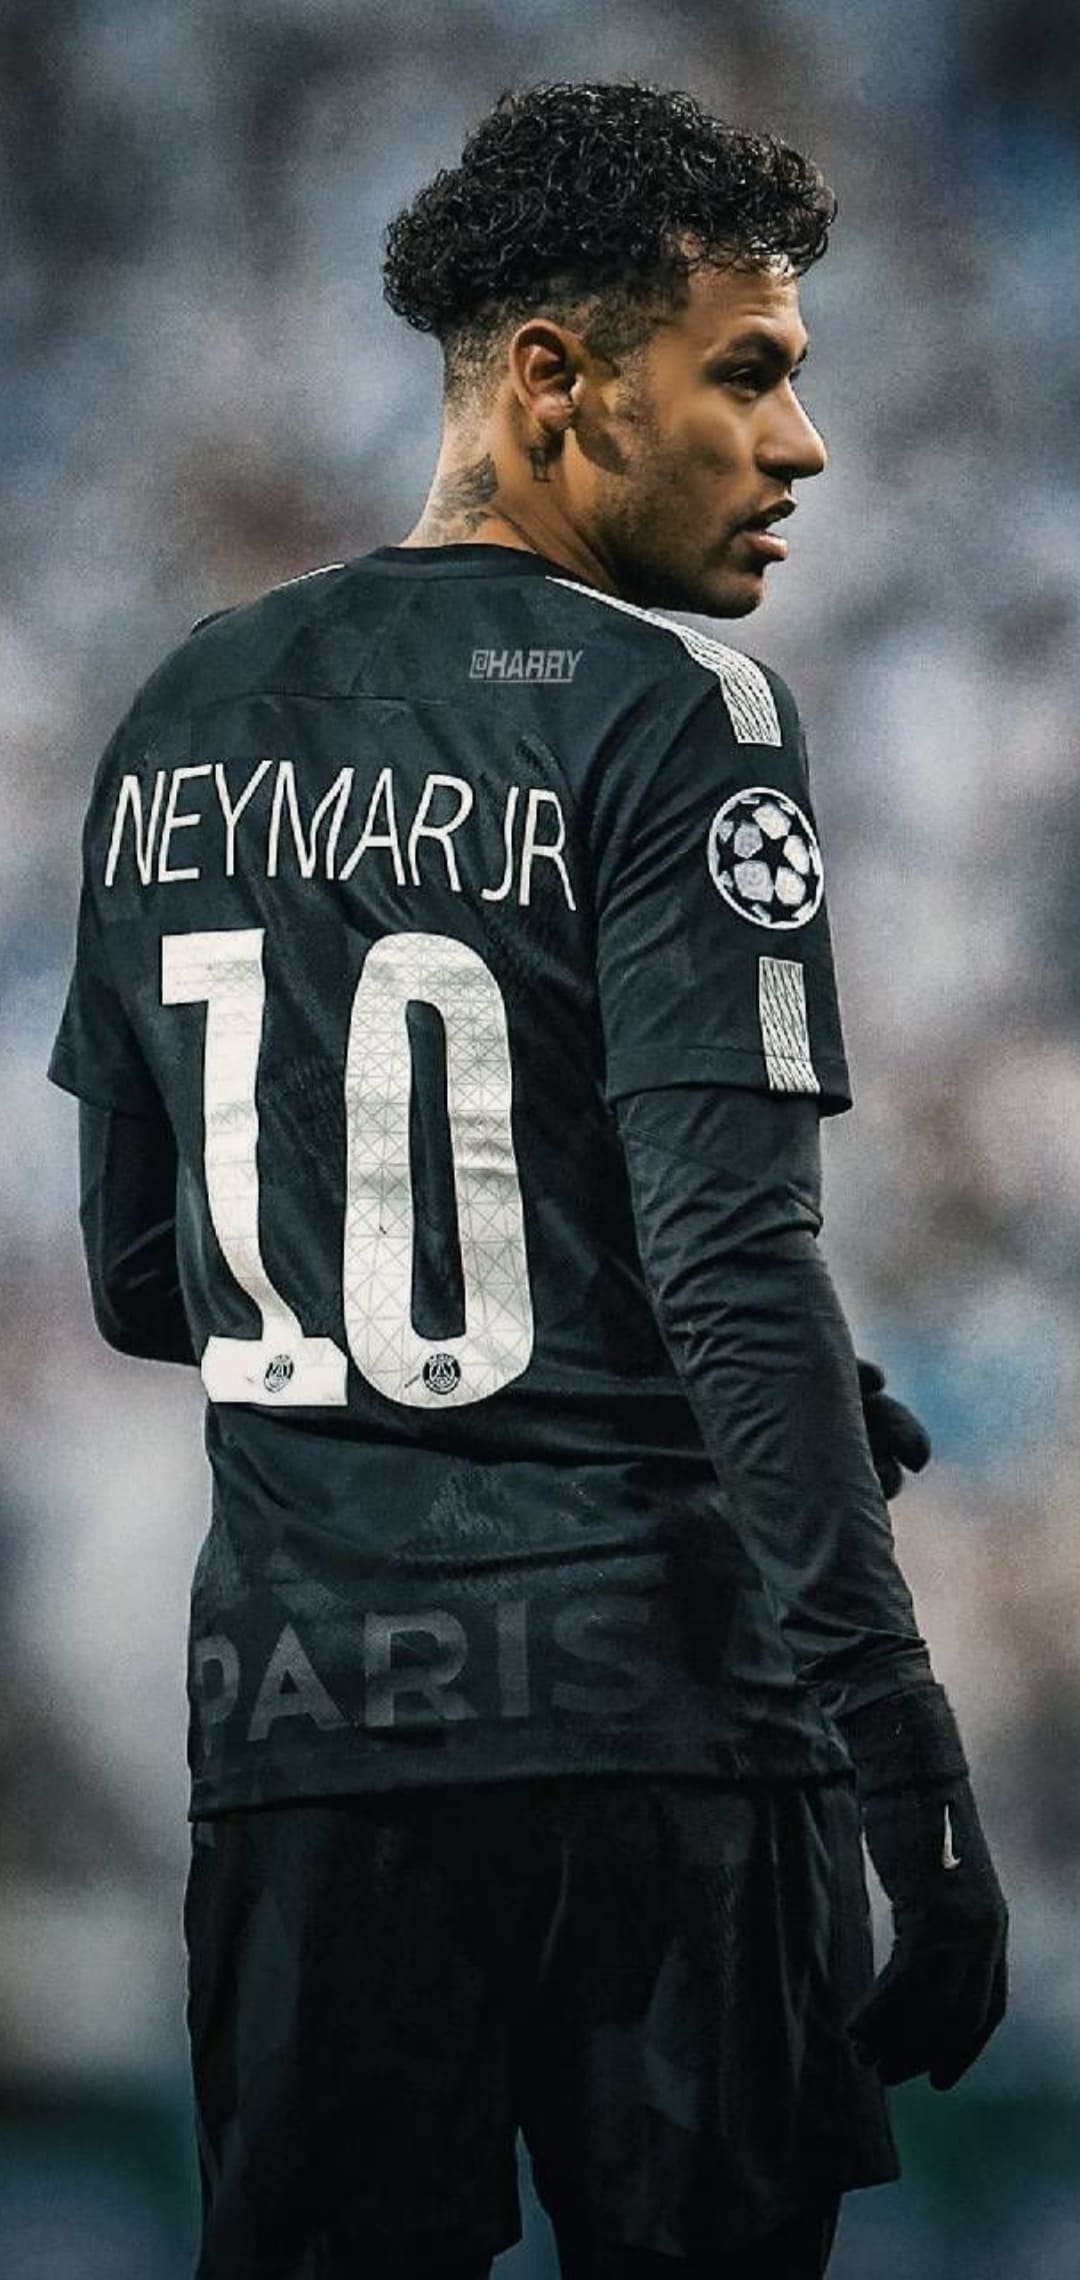 Neymar Wallpapers hd | 4K BACKGROUNDS Apk Download for Android- Latest  version 1.1- com.football.neymar.hdwallpapers